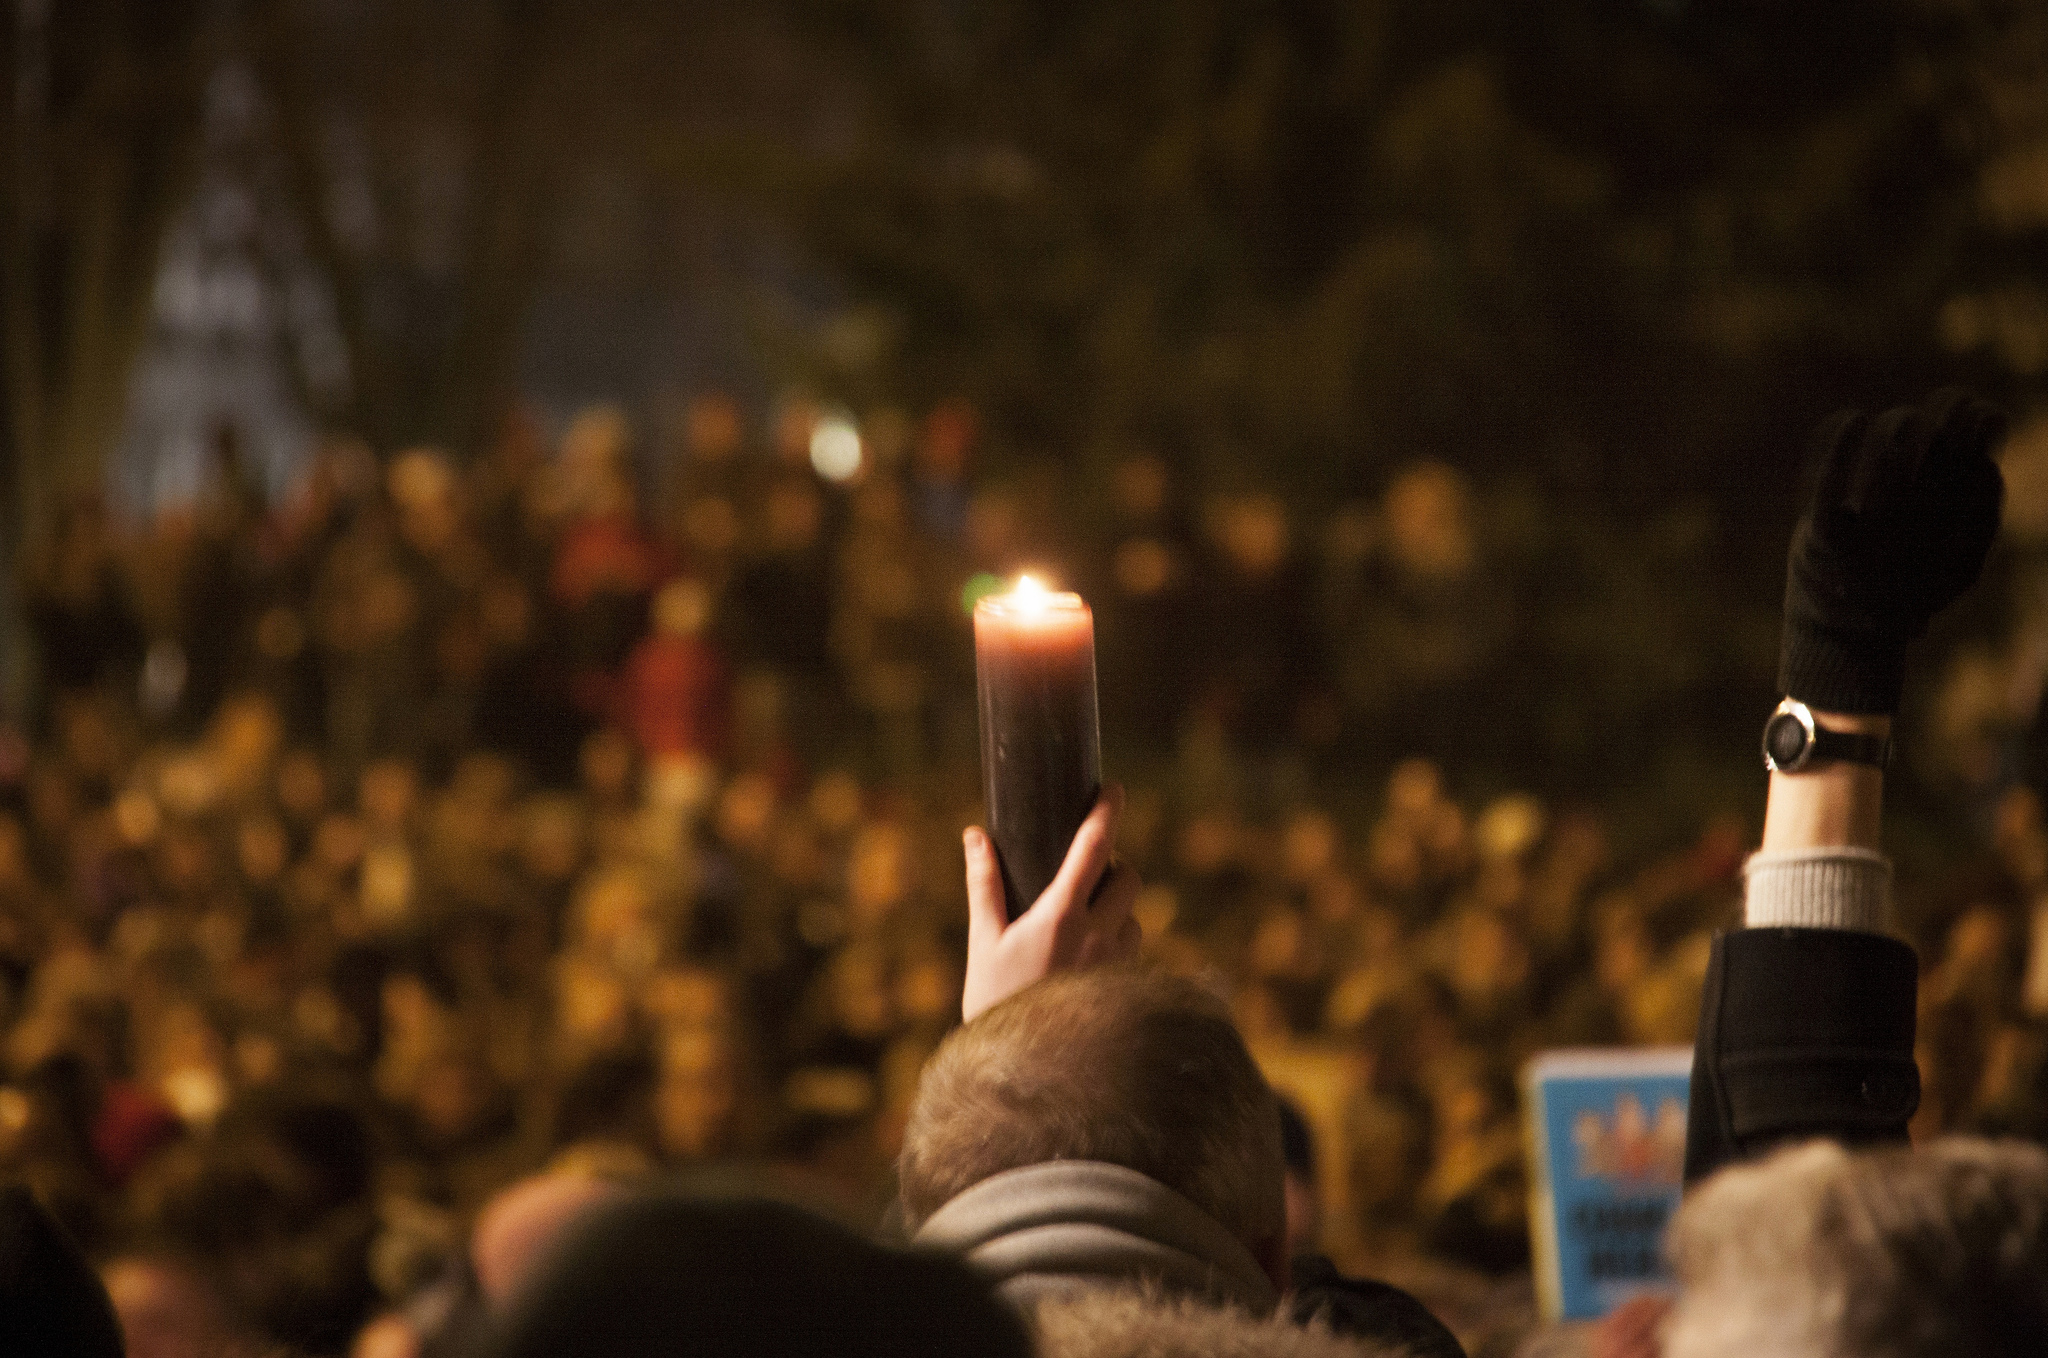 Is It Wrong to Mourn Paris More Deeply Than Beirut?